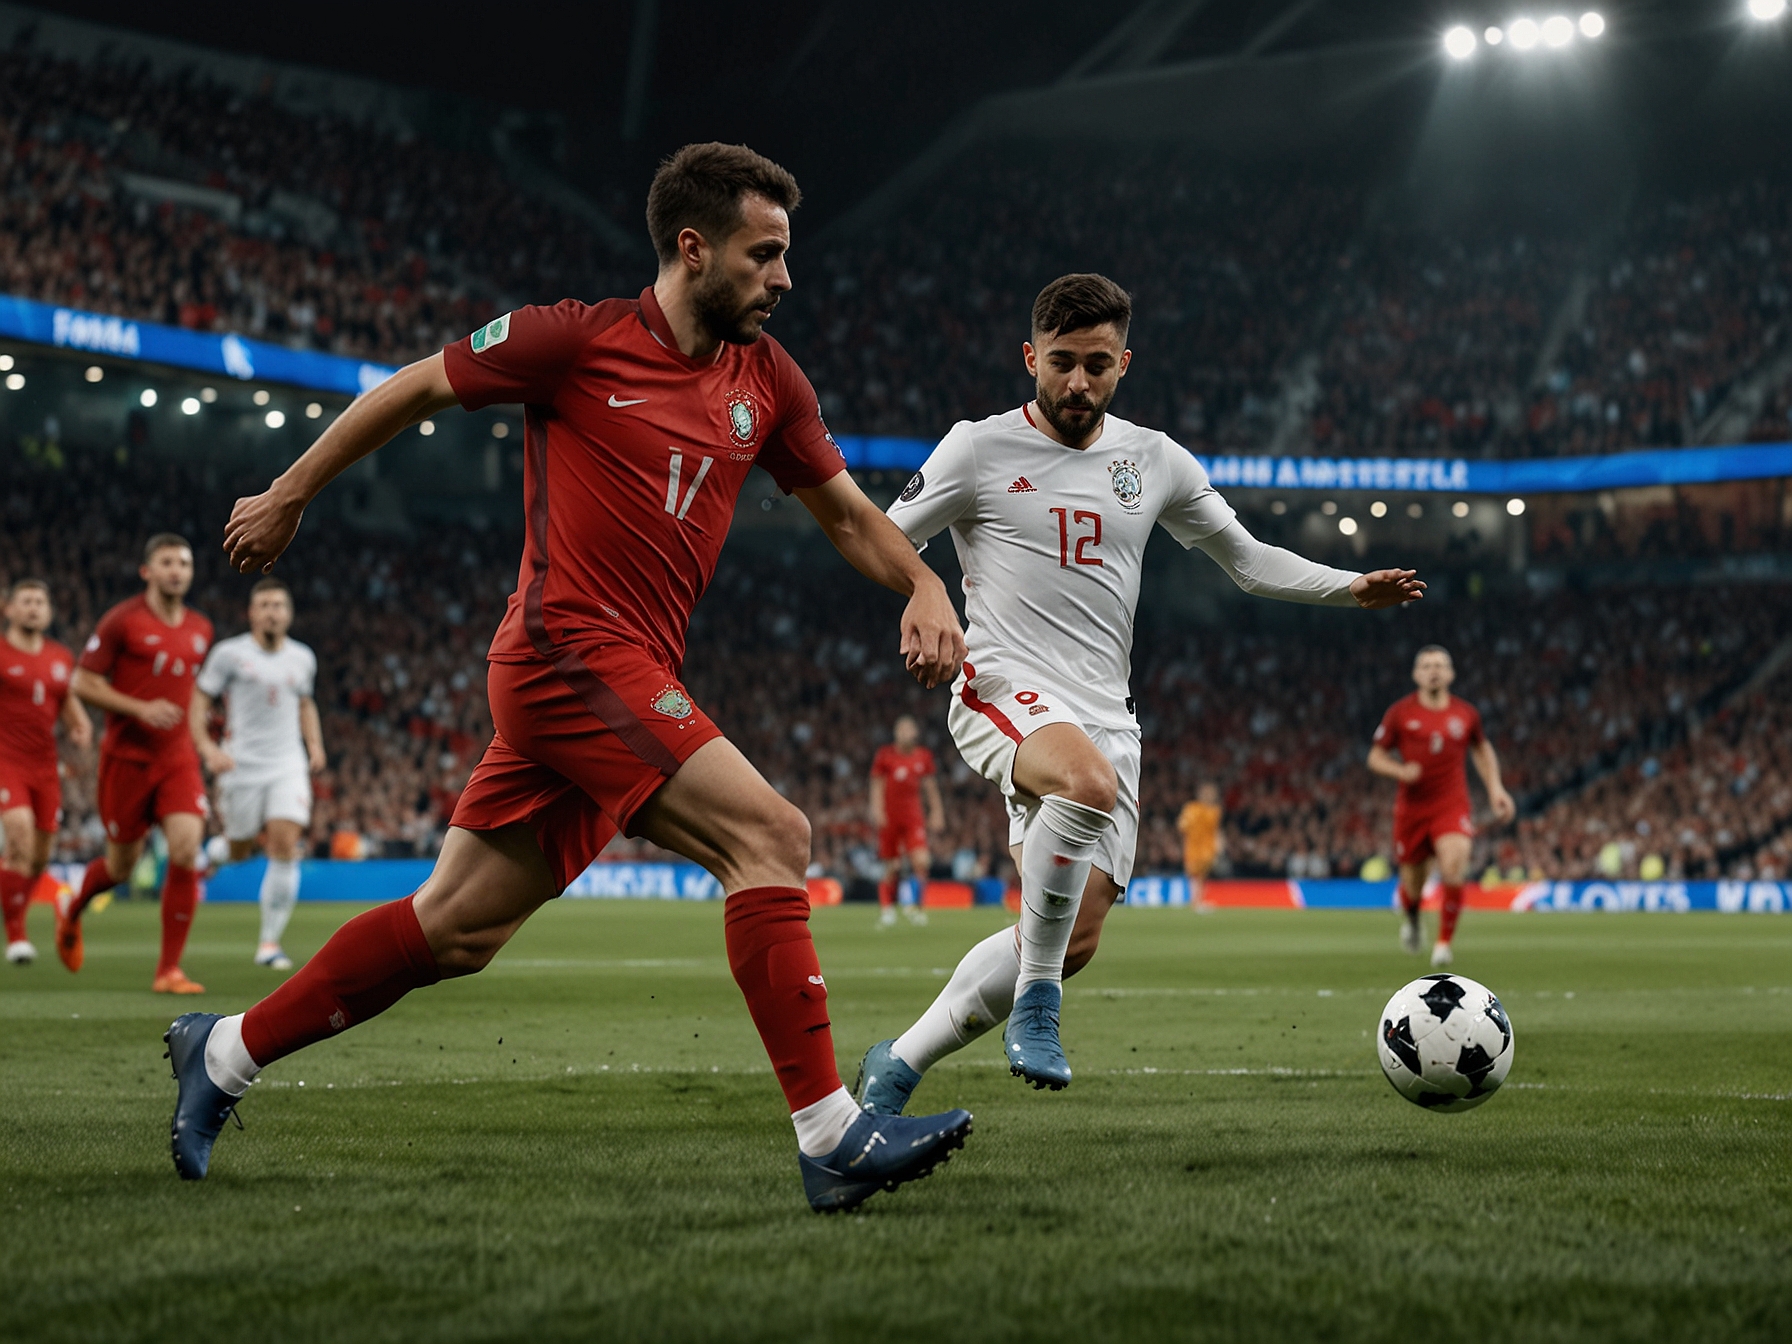 Bernardo Silva scores the opening goal against Turkey with a spectacular curled shot from the edge of the box, putting Portugal in the lead during their UEFA Euro 2024 match.